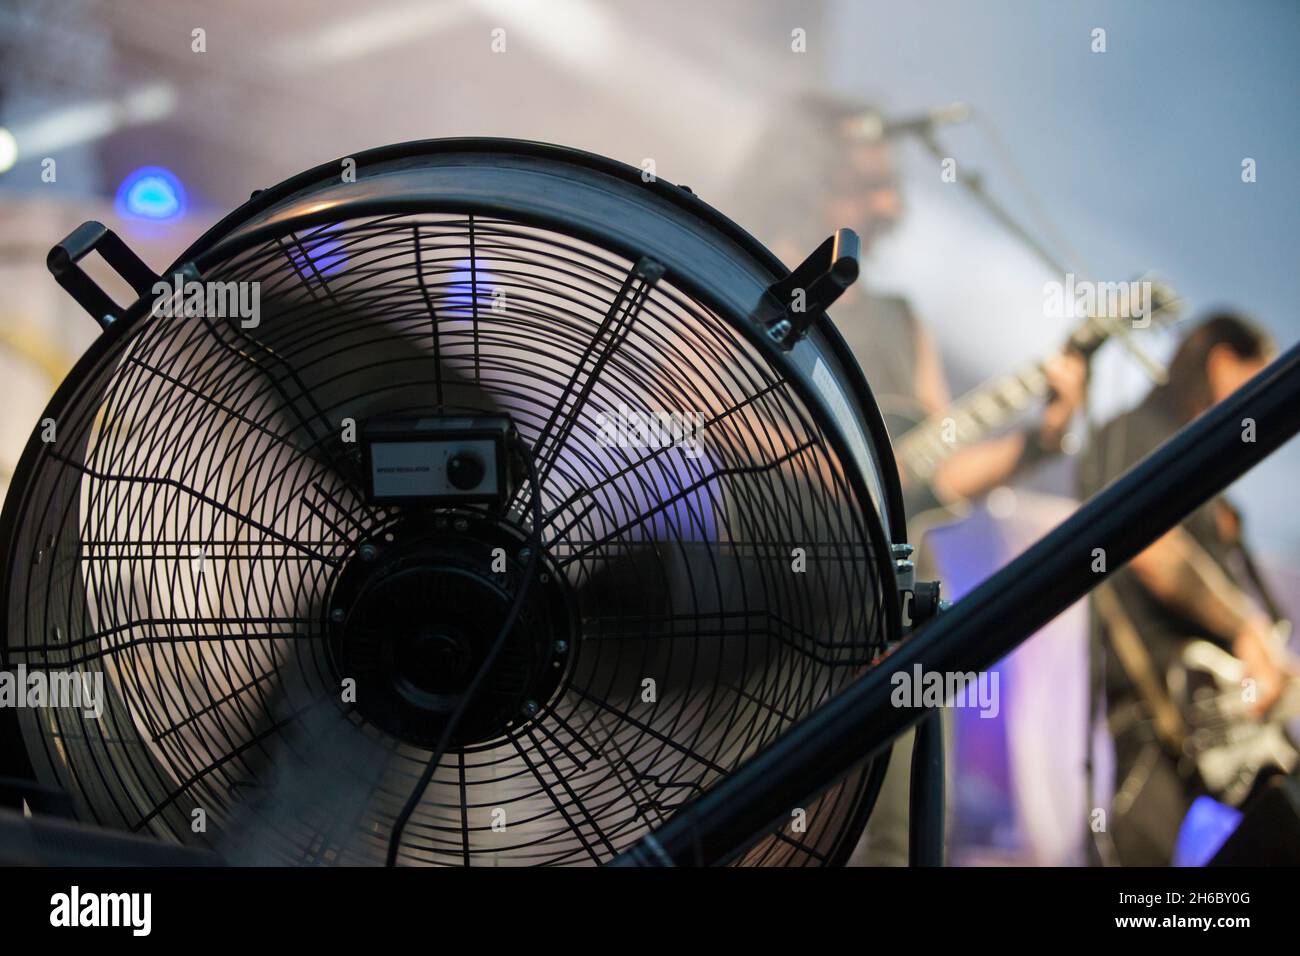 Stage blower used with haze machine during live rock performance. Musicians on background Stock Photo